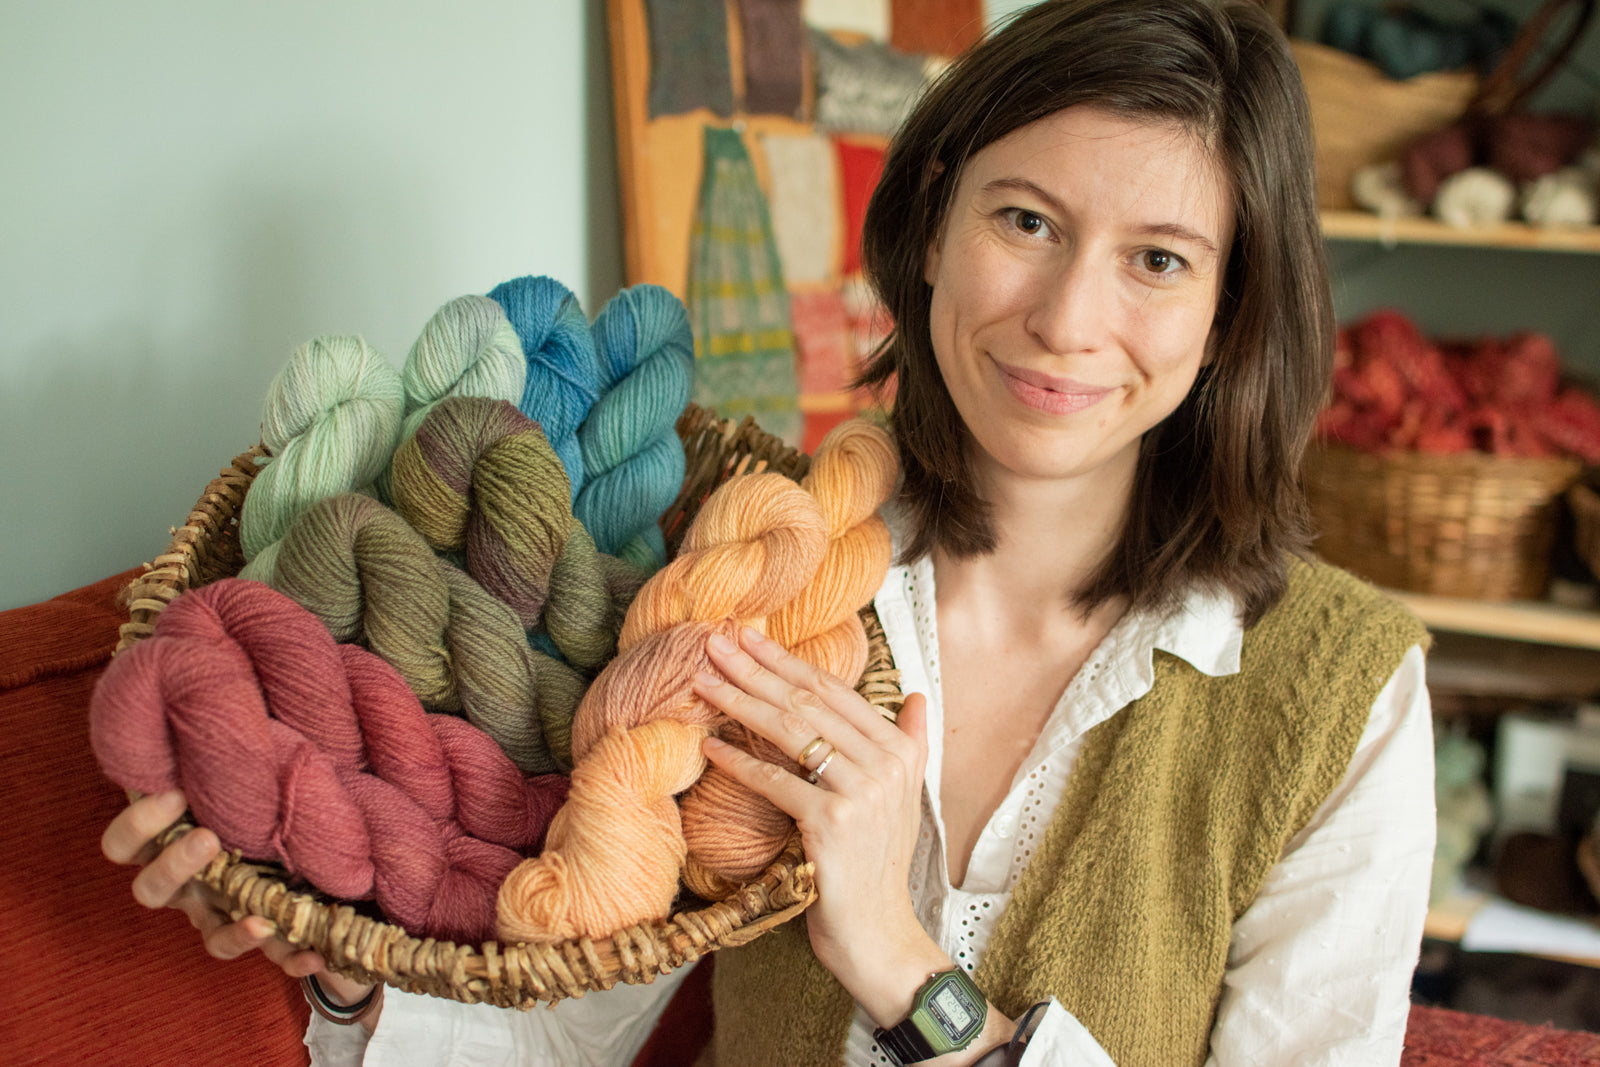 Episode 55 of the Marina Skua Podcast – Calm colours and weaving with hand-spun yarn